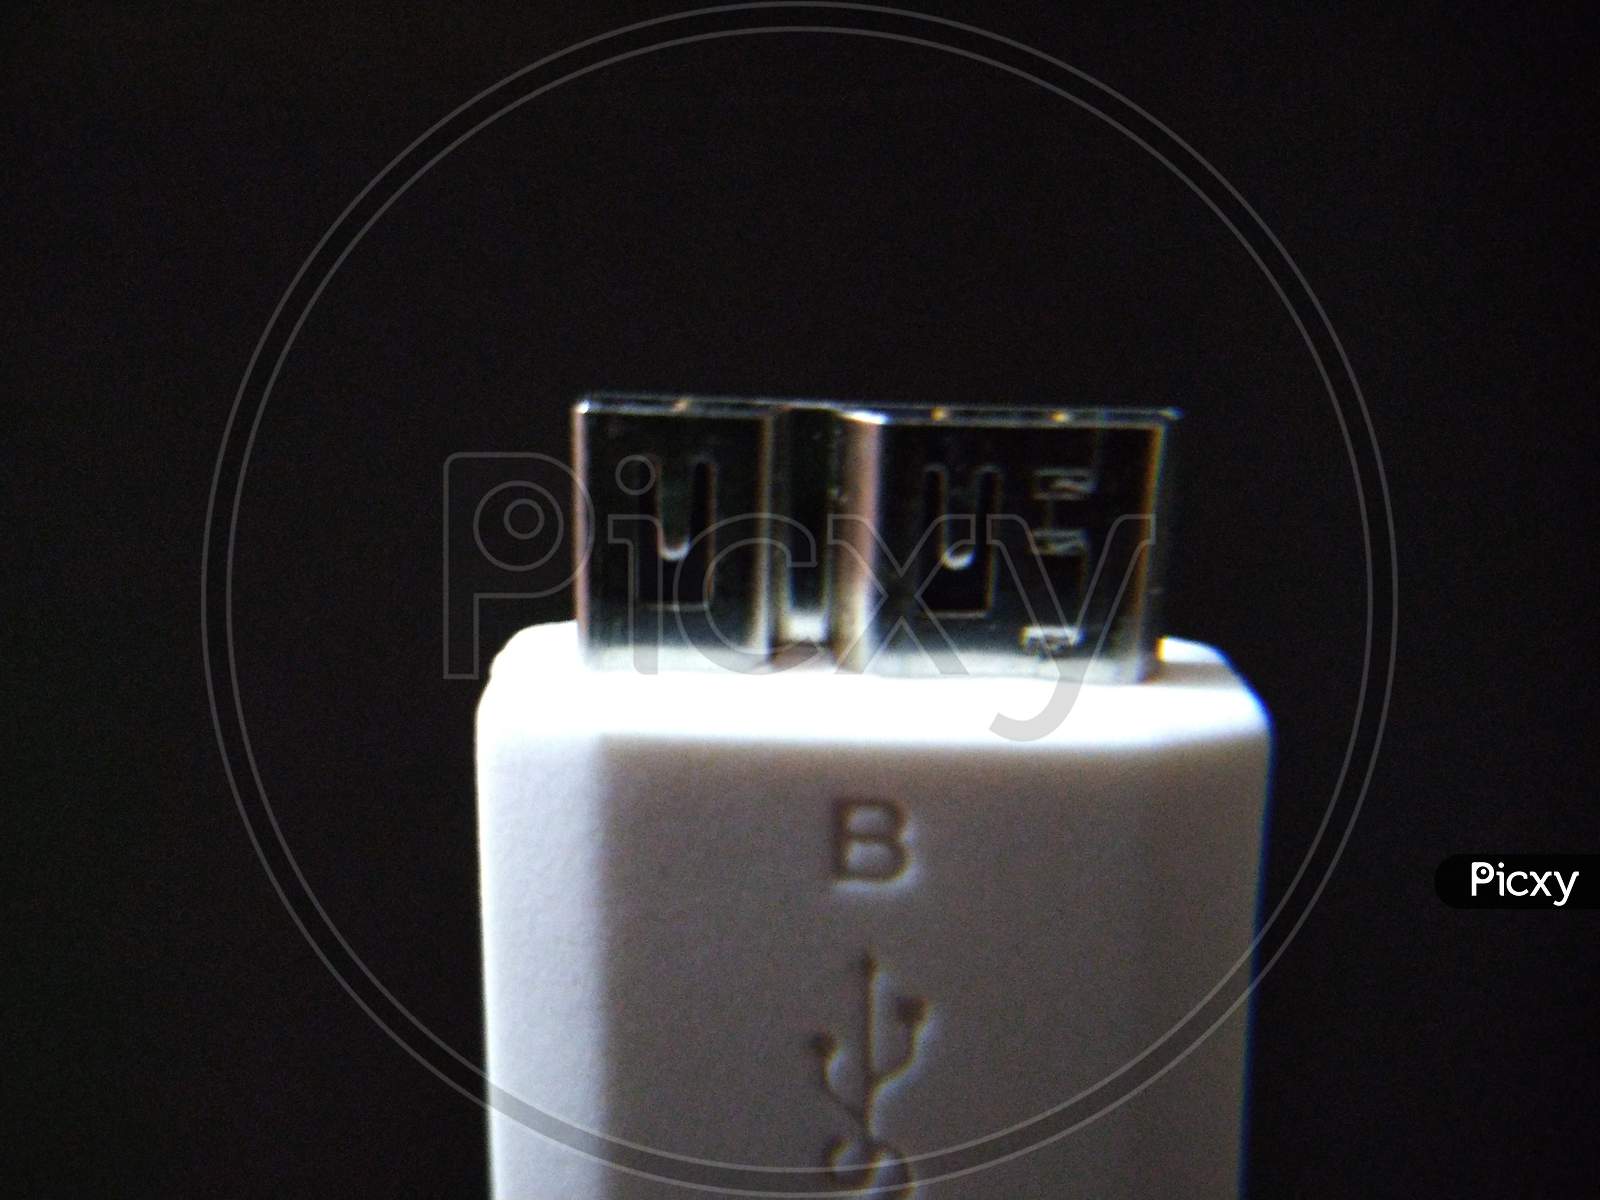 USB Port, High Speed USB Cable For Data Transfer